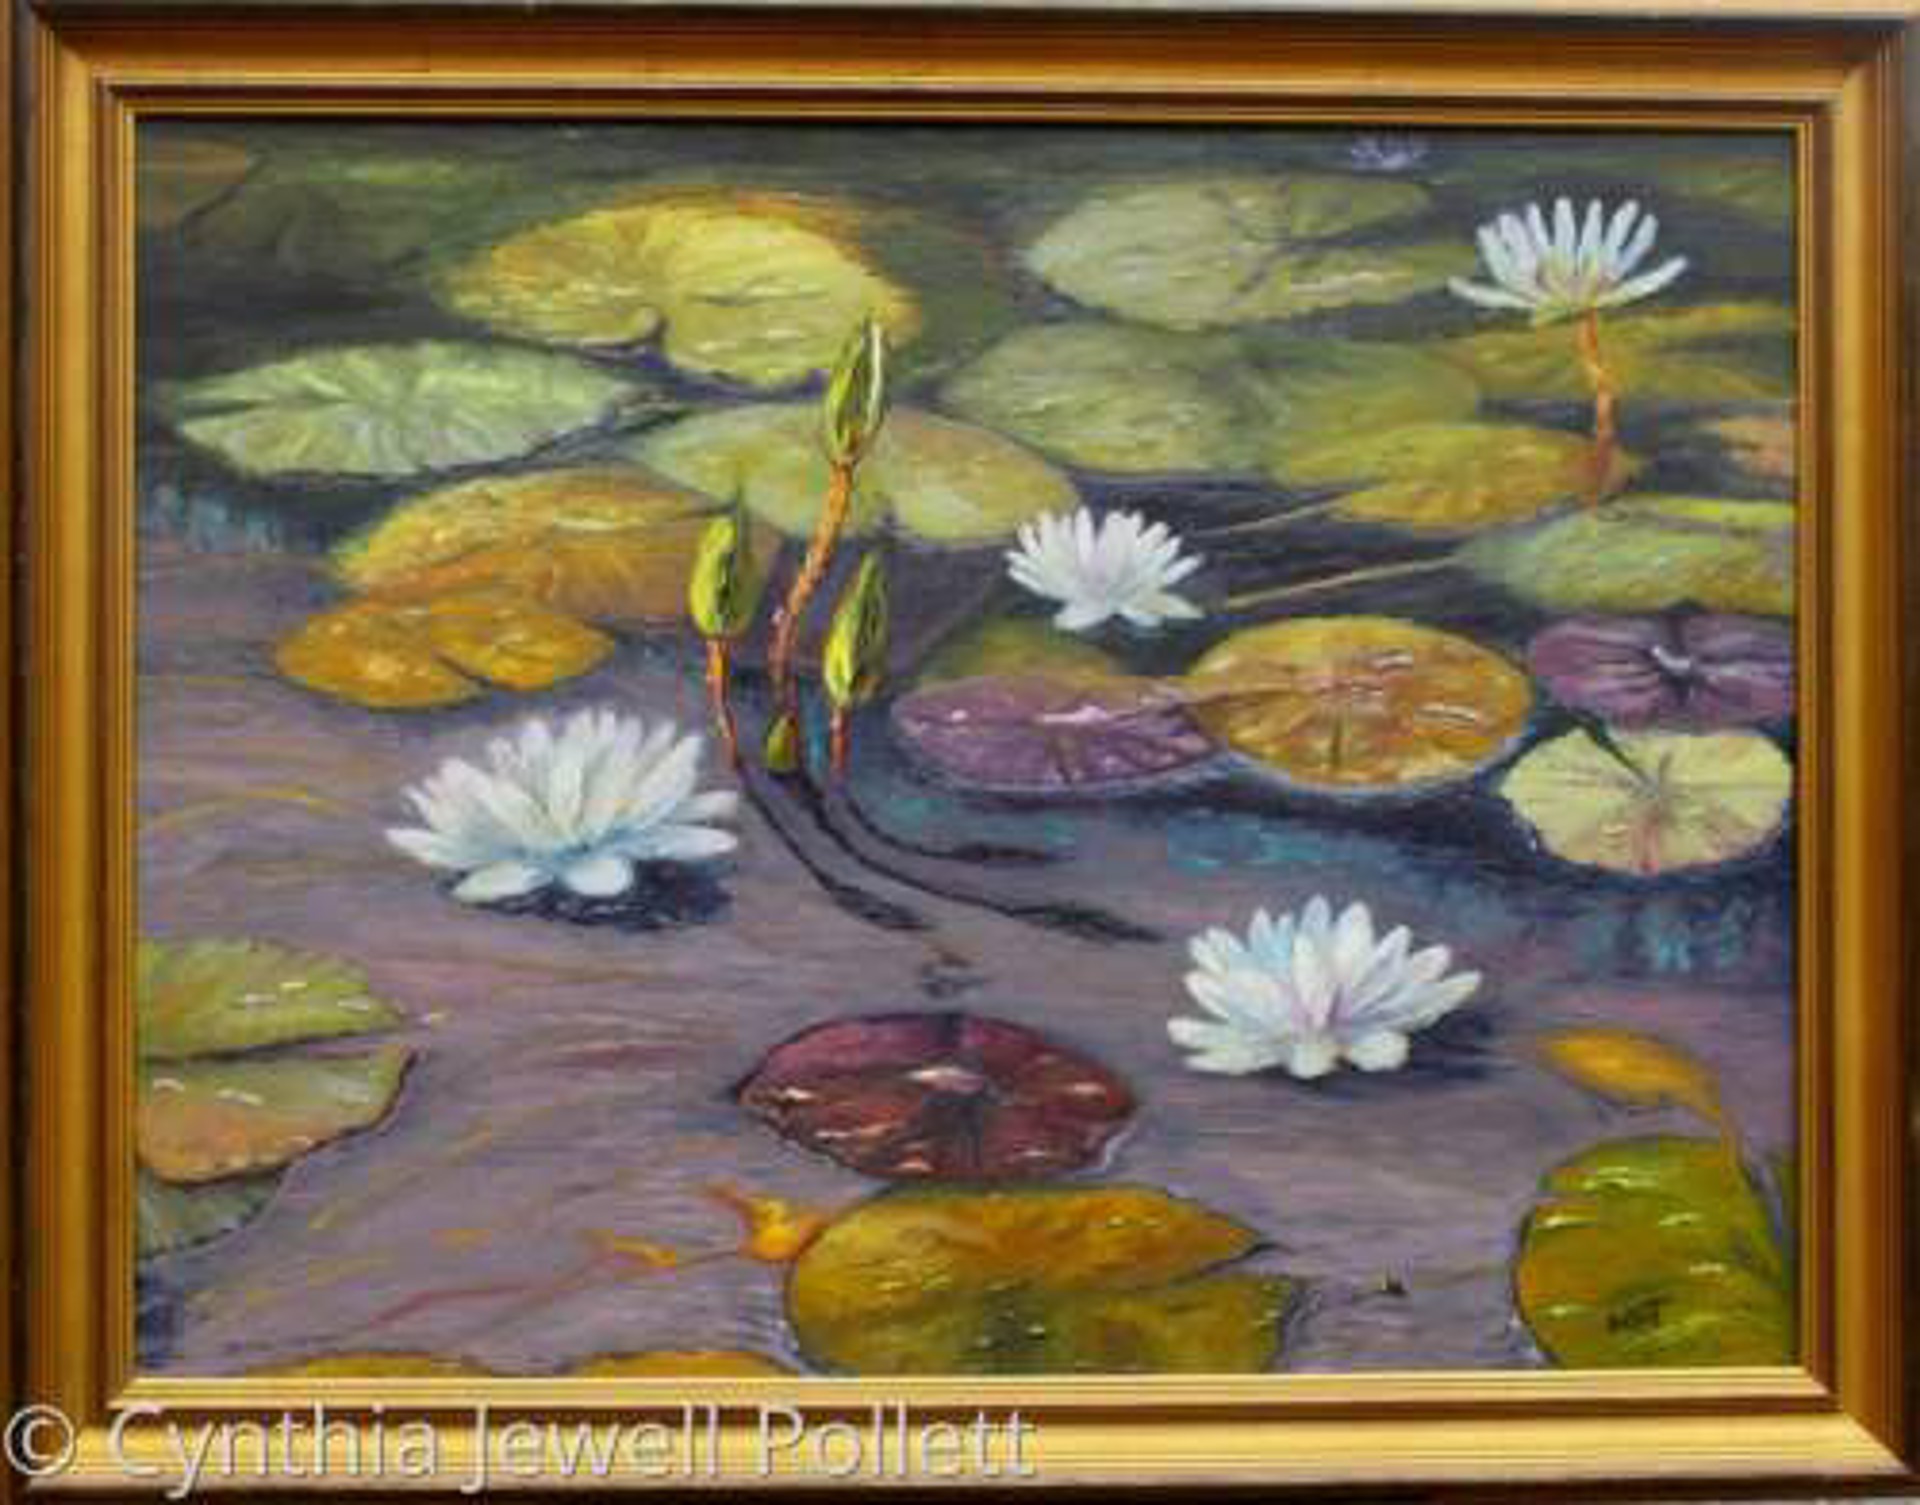 Lilies on Black Water by Cynthia Jewell Pollett